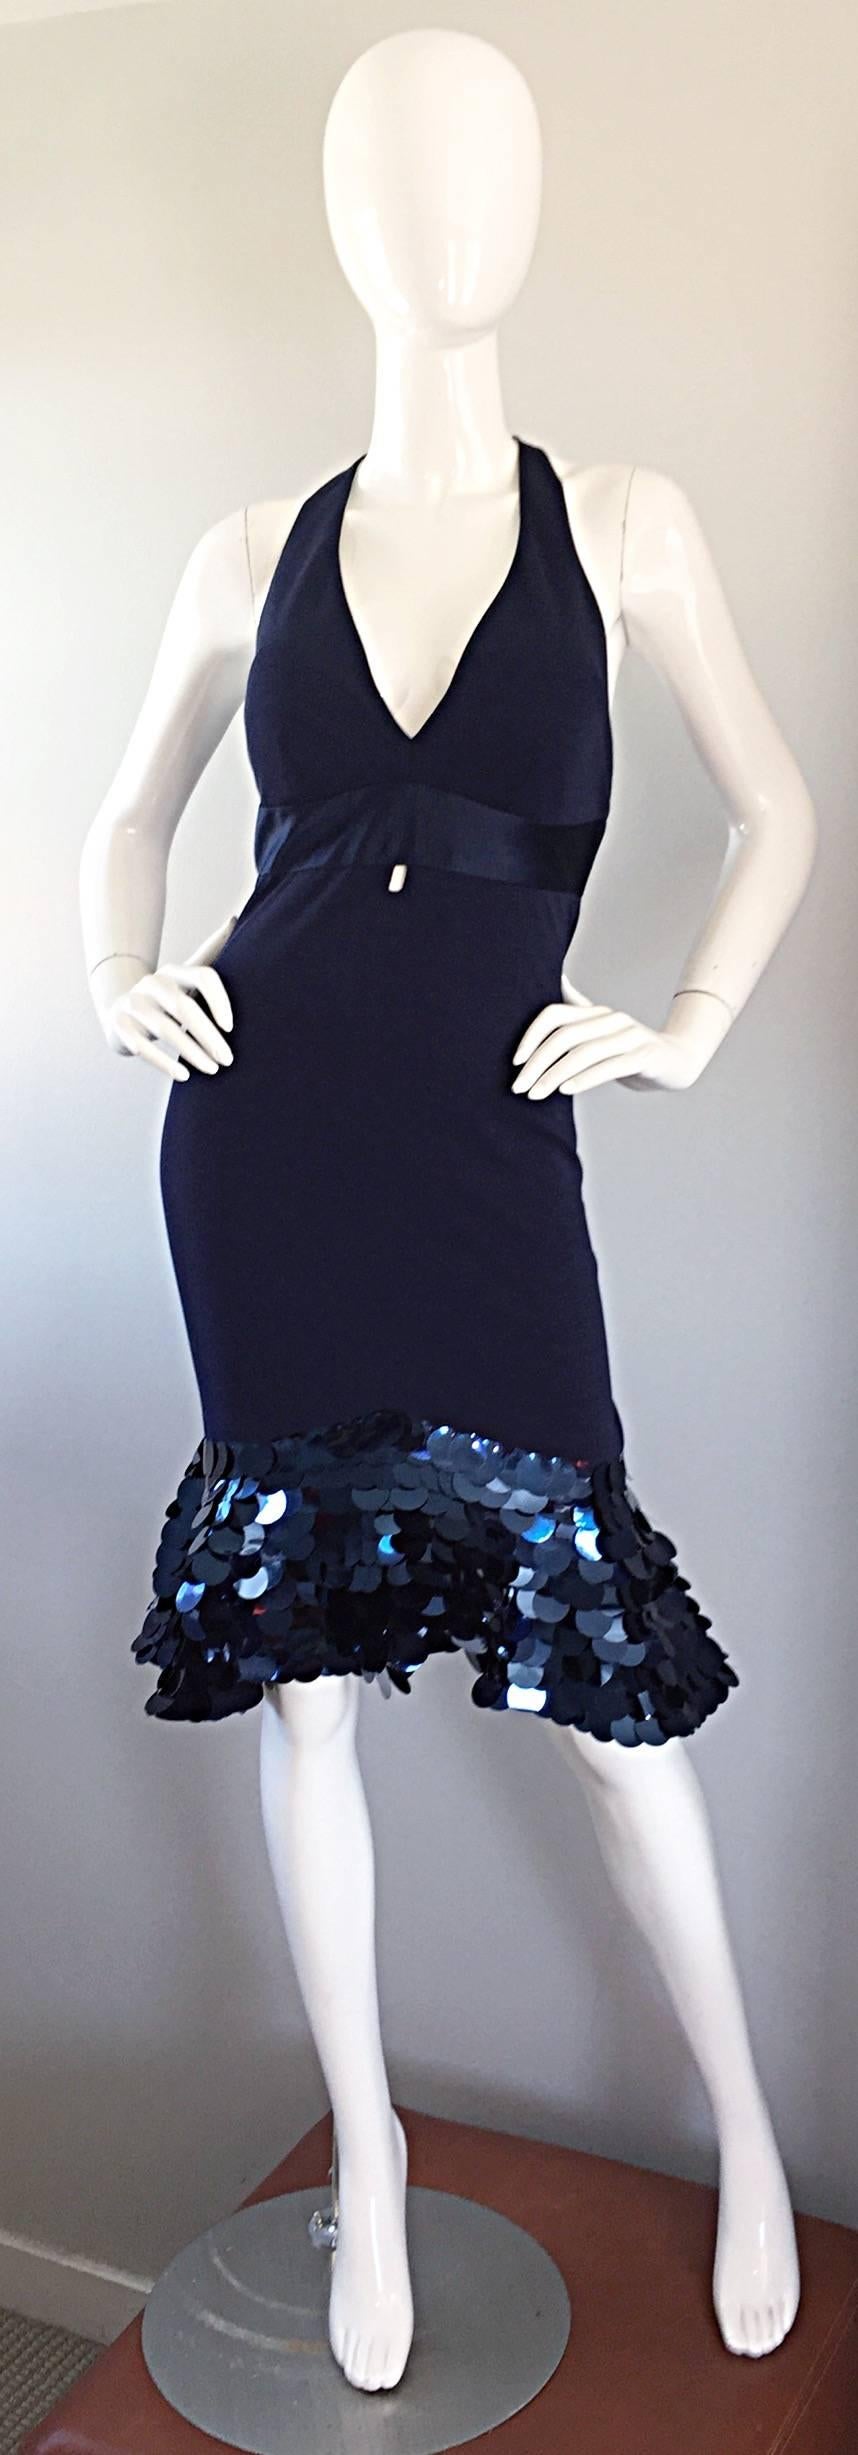 Sexy, yet sophisticated CD GREENE Couture navy blue silk jersey halter dress with paillette / sequined mermaid flared hem! One of a kind piece retailed for $7,500 at Bergdorf Goodman NYC. Bergdorf only offers one of each of these handmade beauties,